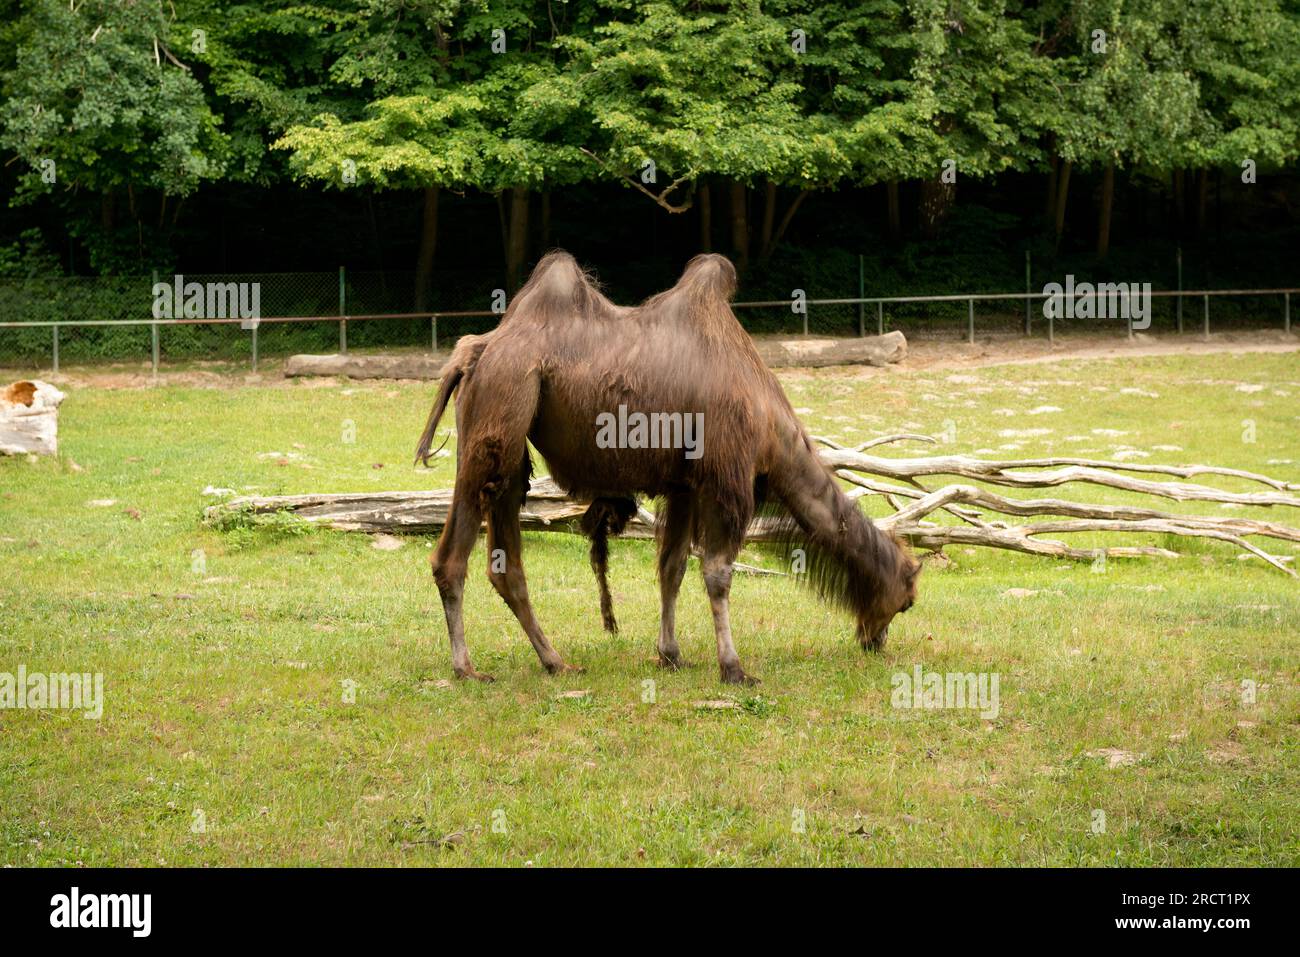 Adult Bactrian Camel or Camelus bactrianus two-humped camel grazing in the Gdansk Zoo, Gdansk, Poland Stock Photo